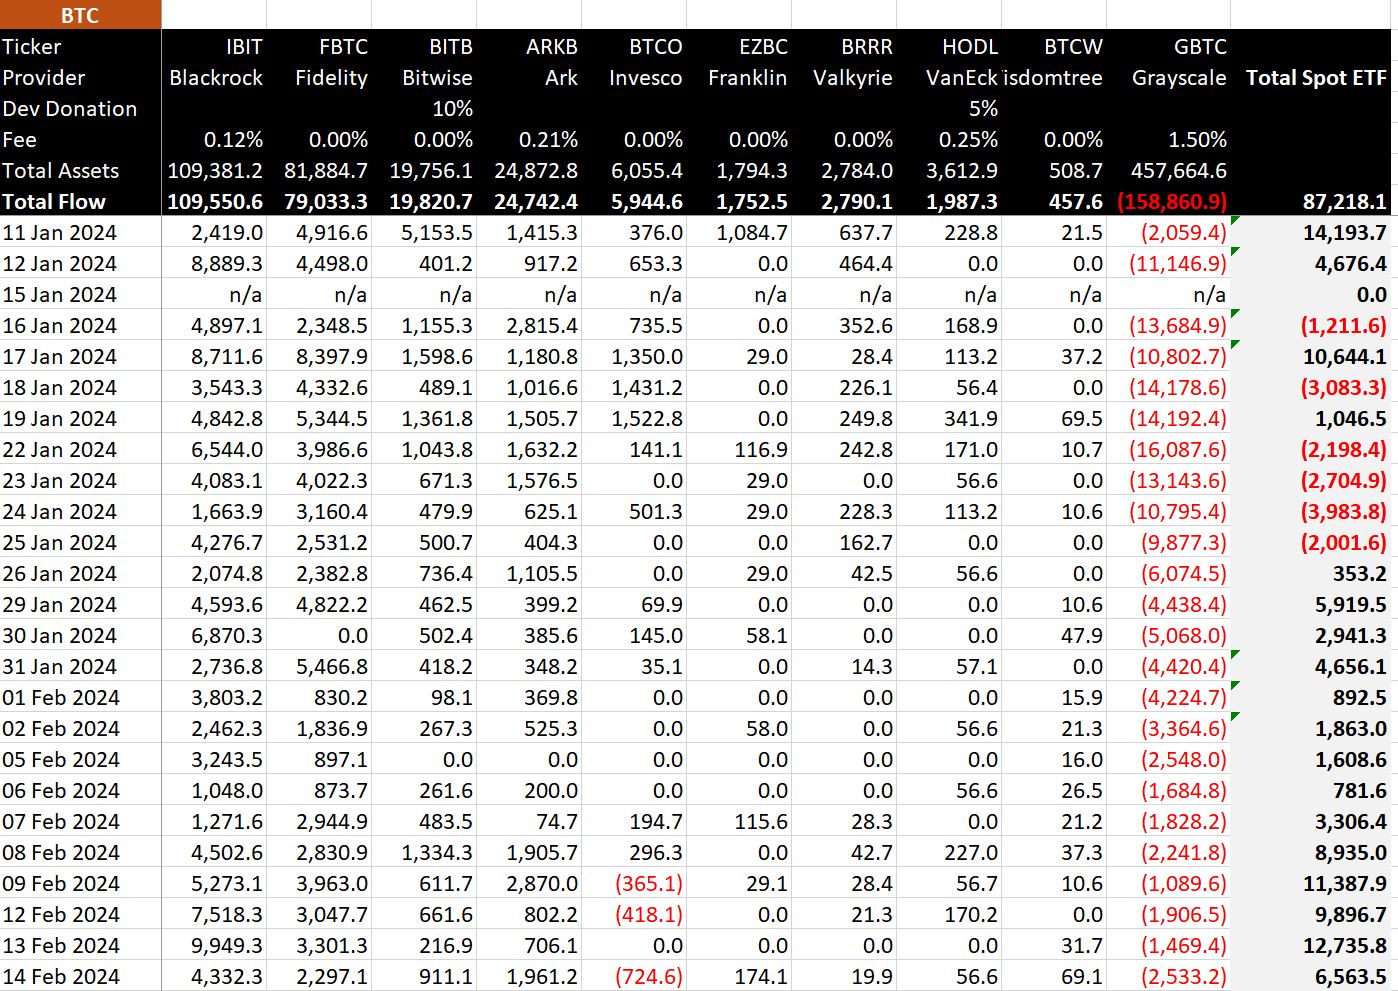 The right-hand column shows the daily inflows and outflows of all BTC spot ETFs